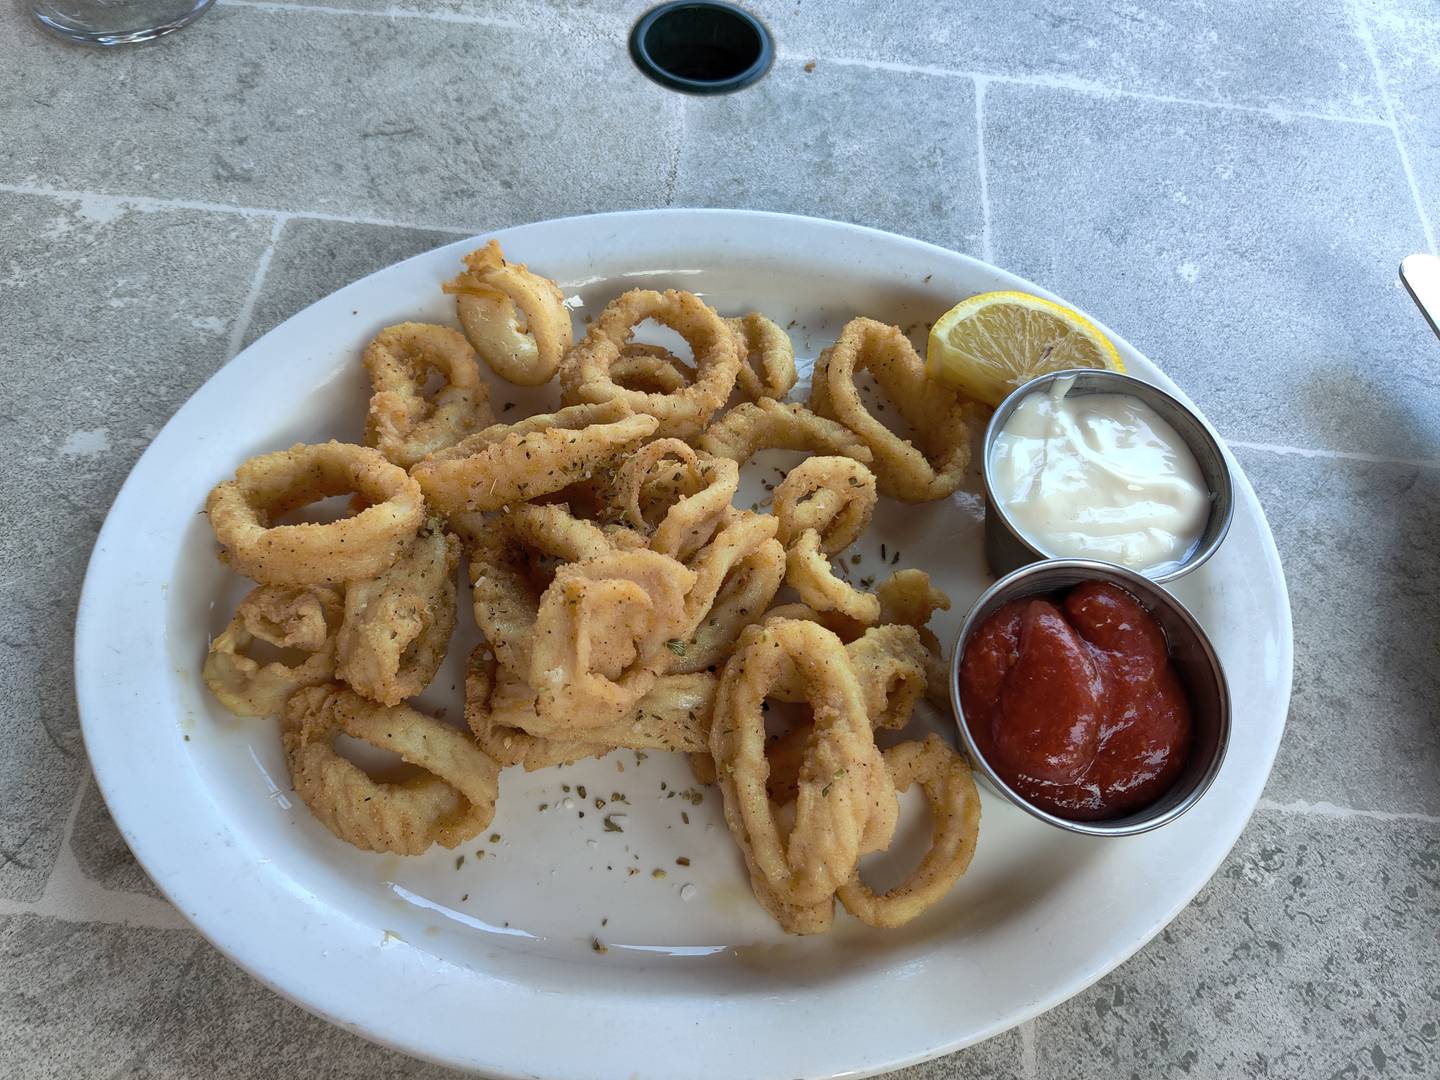 The fried calamari appetizer at Riganato Old World Grille in Geneva.